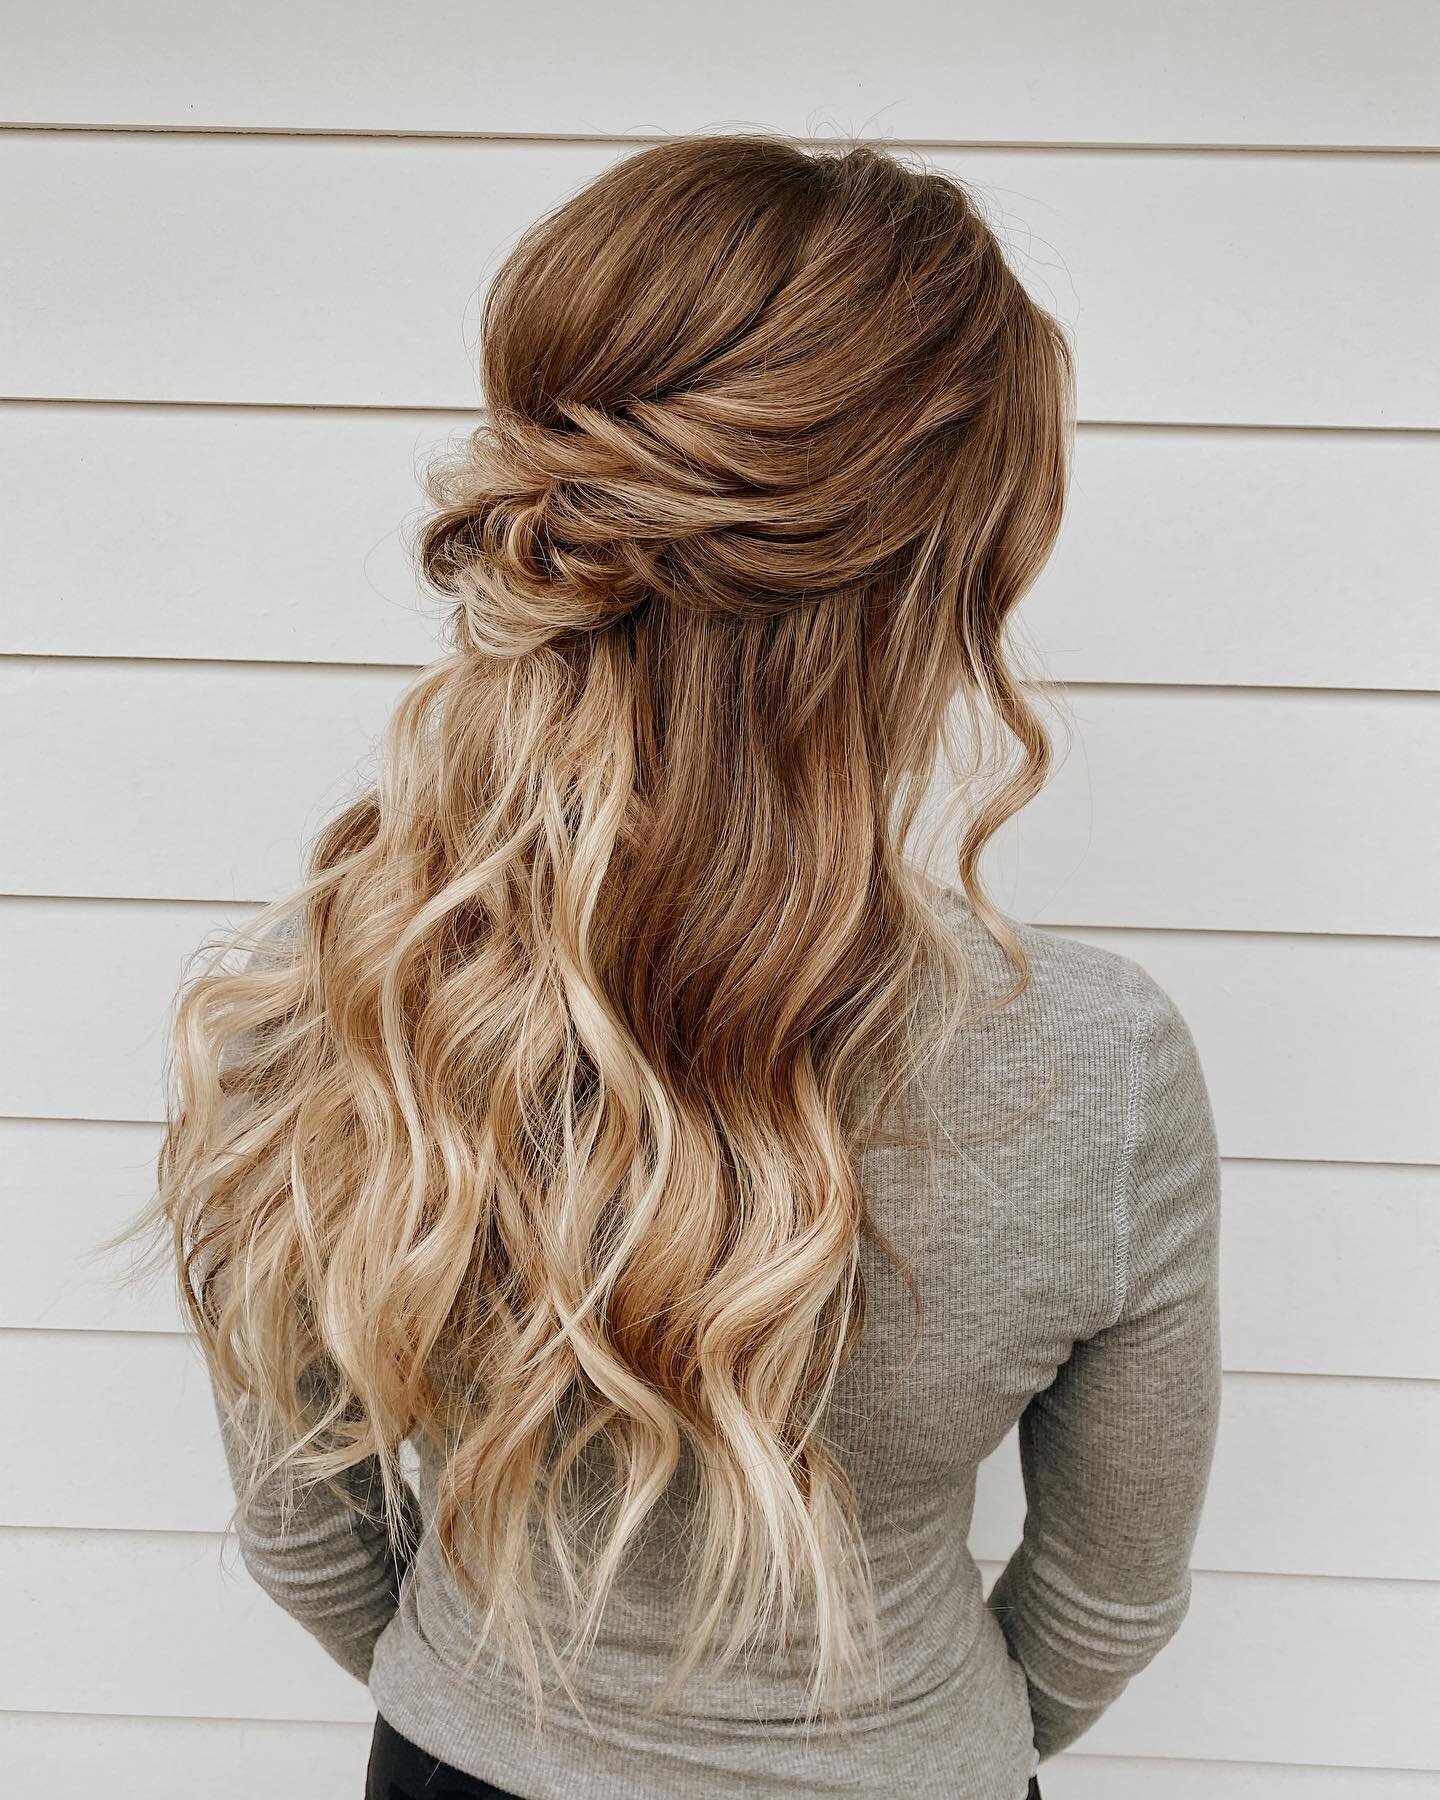 1 trial ➵ 2 styles ✨
⠀
If you&rsquo;re having a hard time deciding which style you want for your big day, don&rsquo;t worry! We can try out 2 different styles at your trial! 🧚🏼&zwj;♀️
⠀
⠀
⠀
#bohohairstyles #blondeboho #blondehairstyles #classicbrid